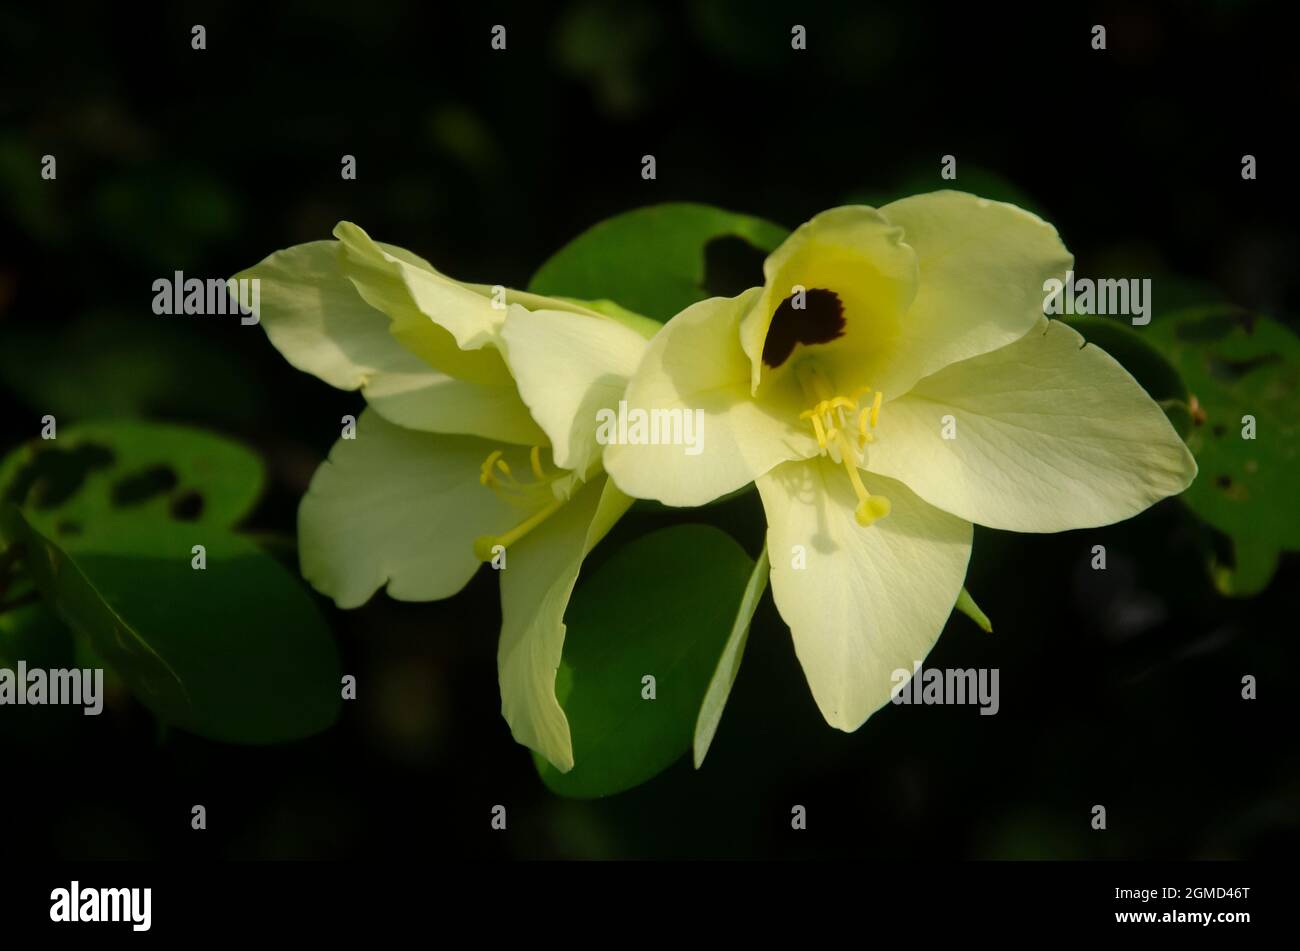 Selective focus on BAUHINIA TOMENTOSA flowers isolated in blur background in morning sunshine. White, yellow and violet flowers. Beautiful flowers. Stock Photo